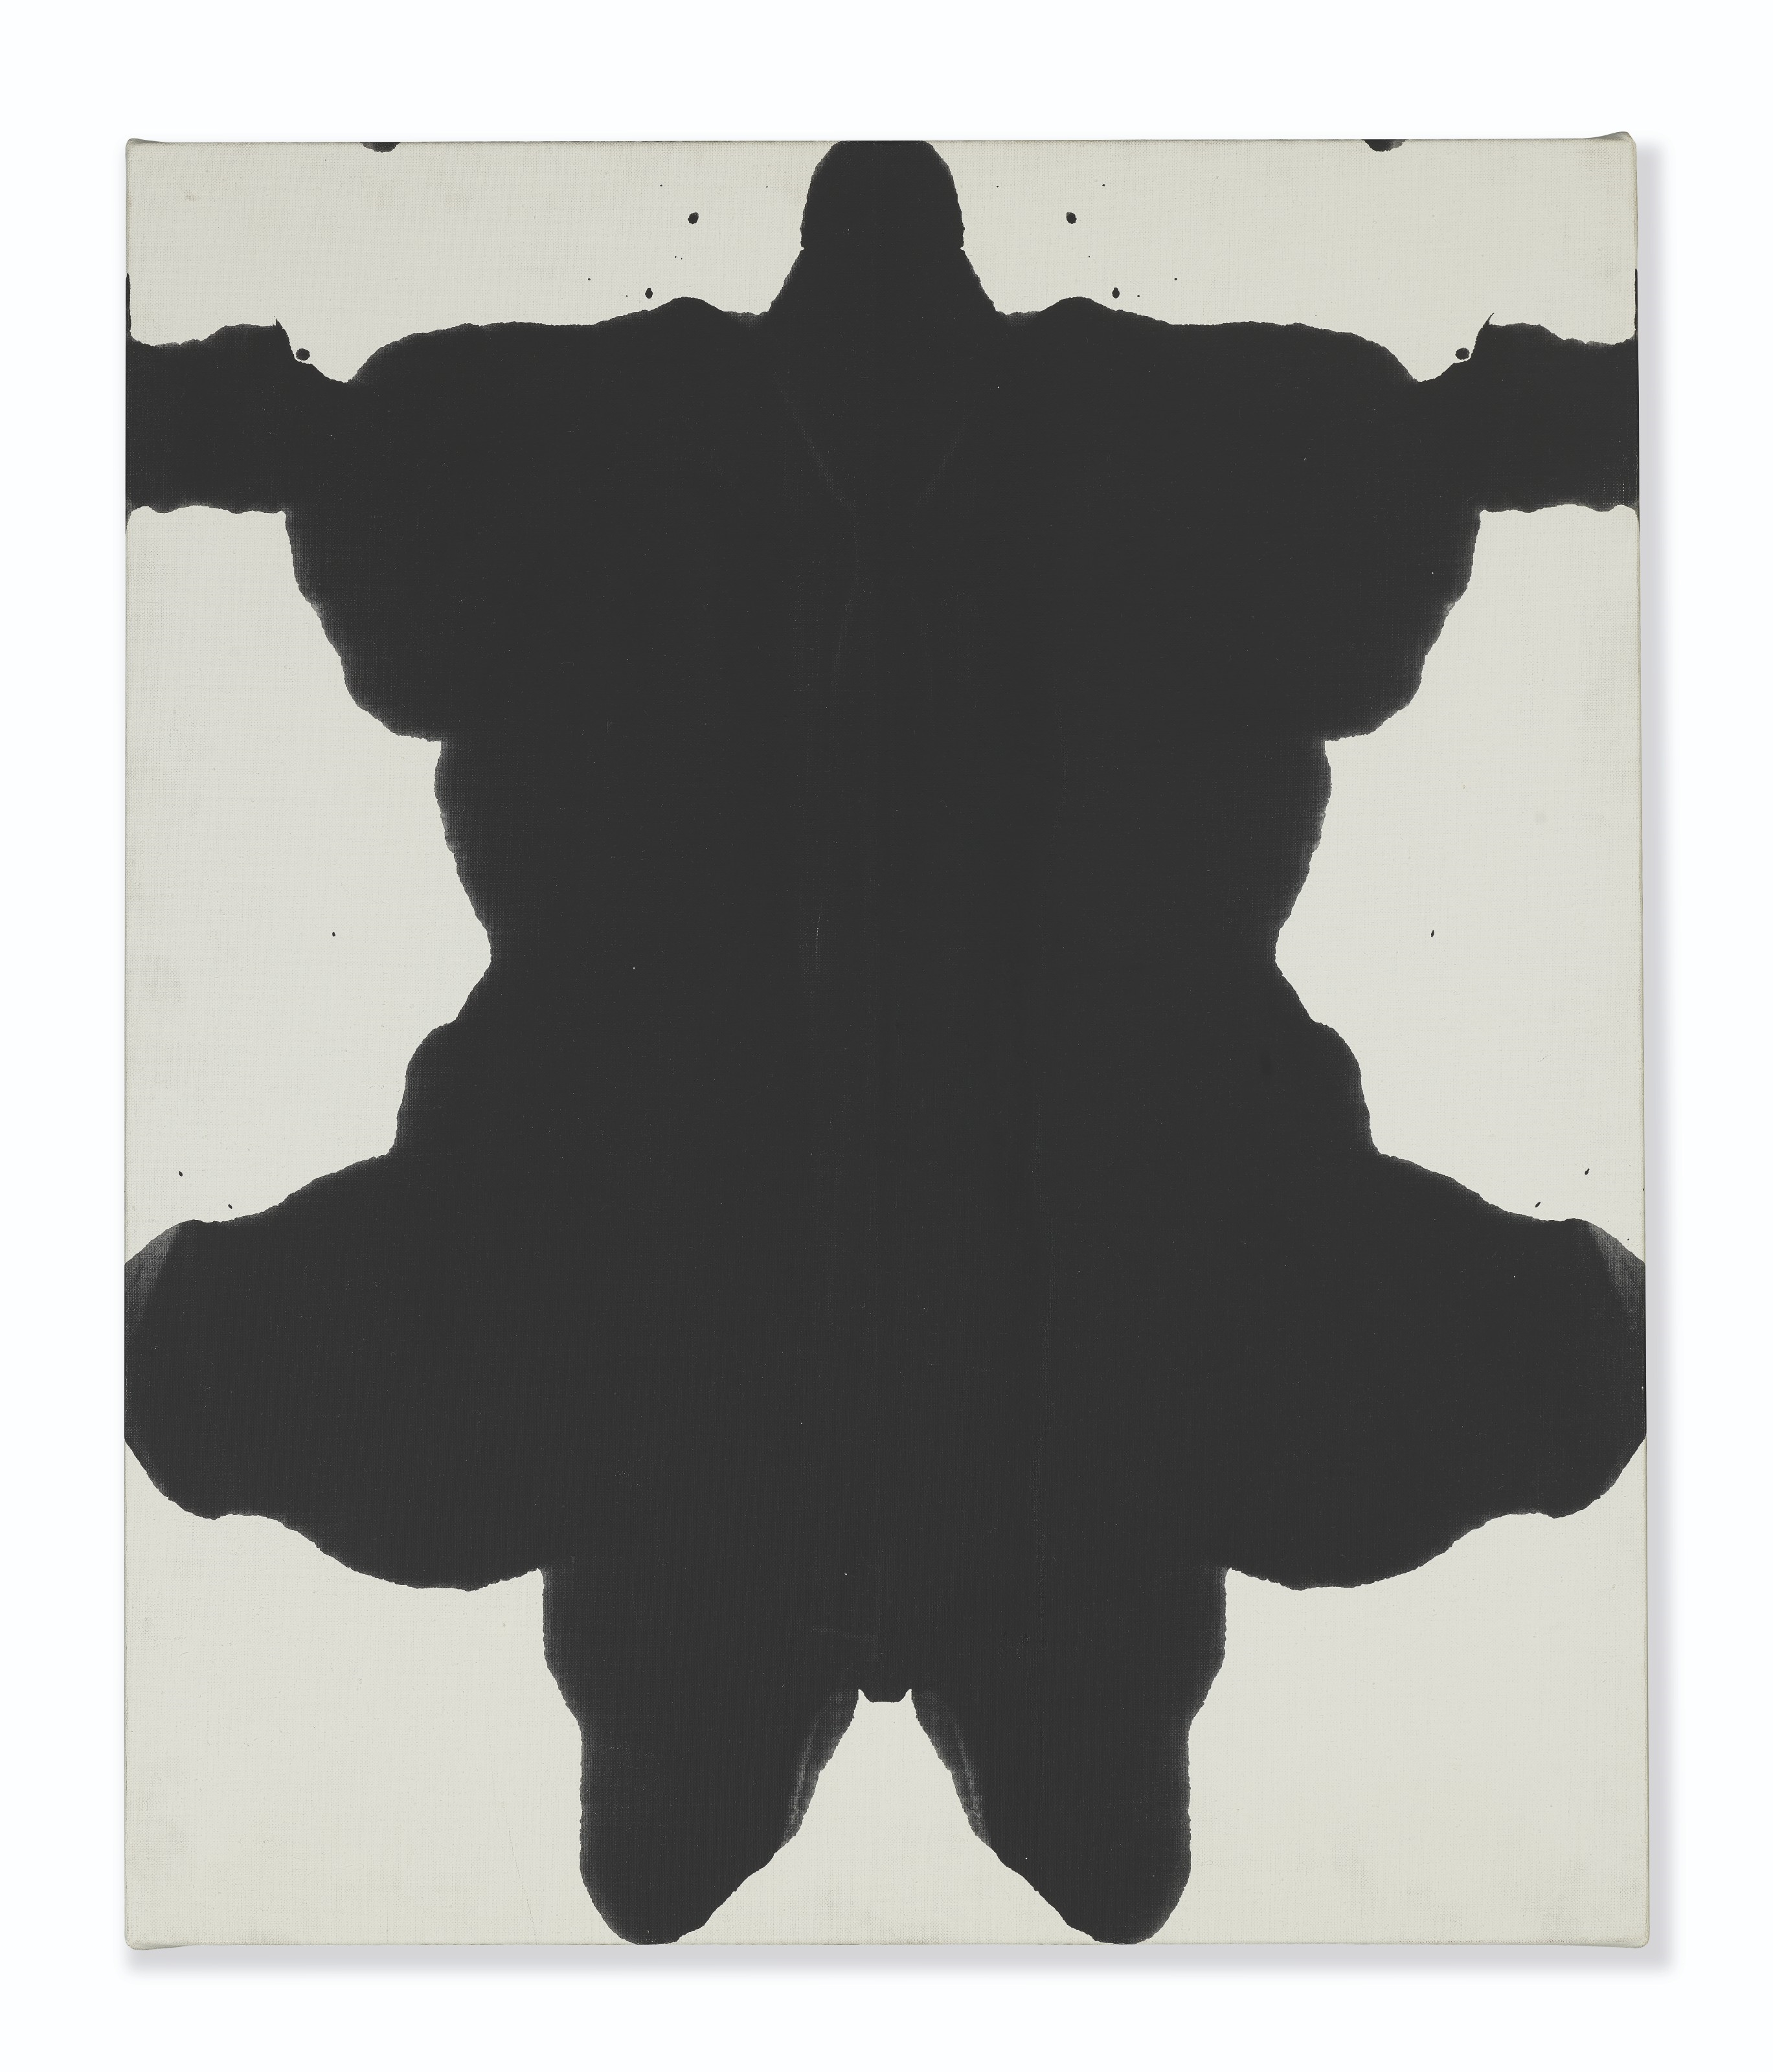 Rorschach by Andy Warhol, Painted in 1984